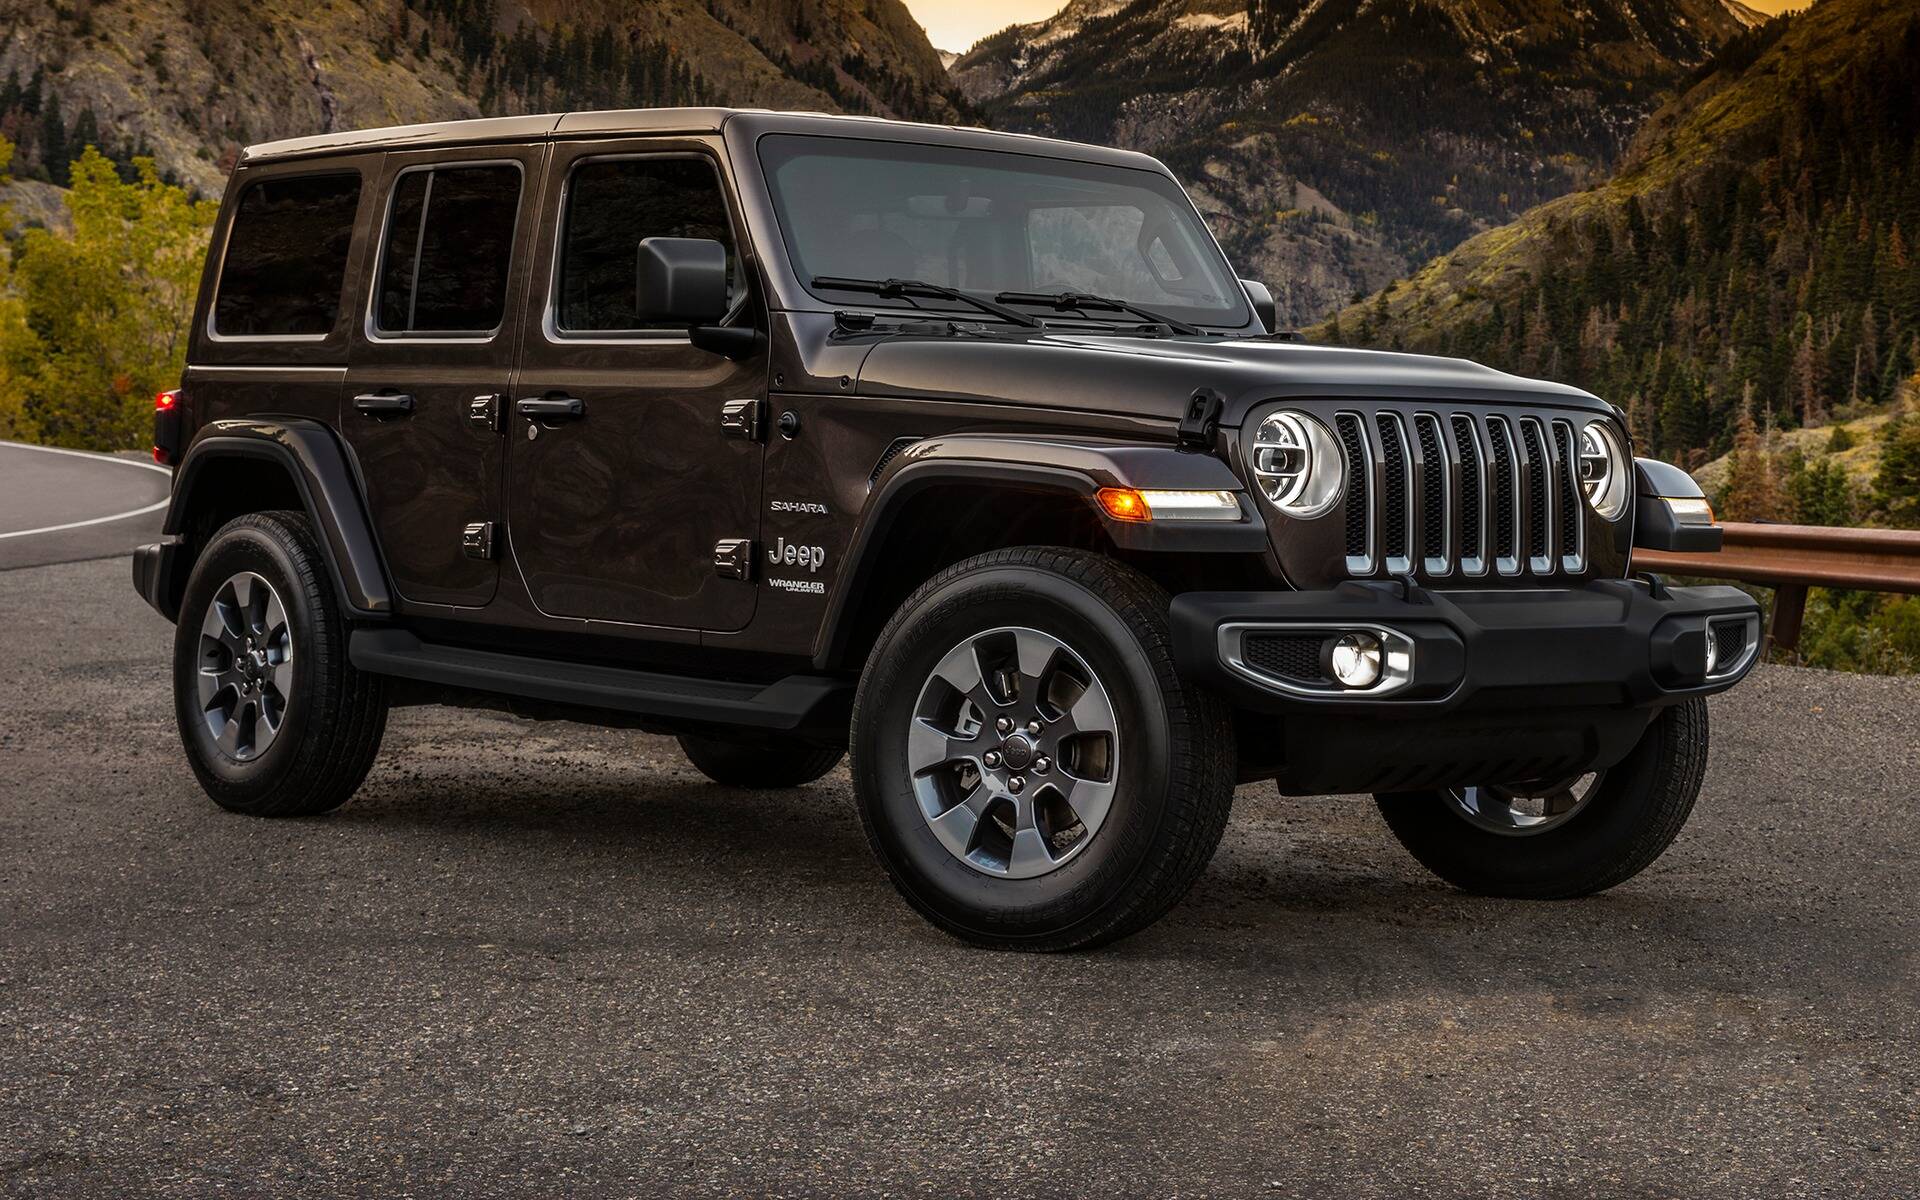 Pre-Owned Jeep Wrangler: What Trim Should You Get? - The Car Guide